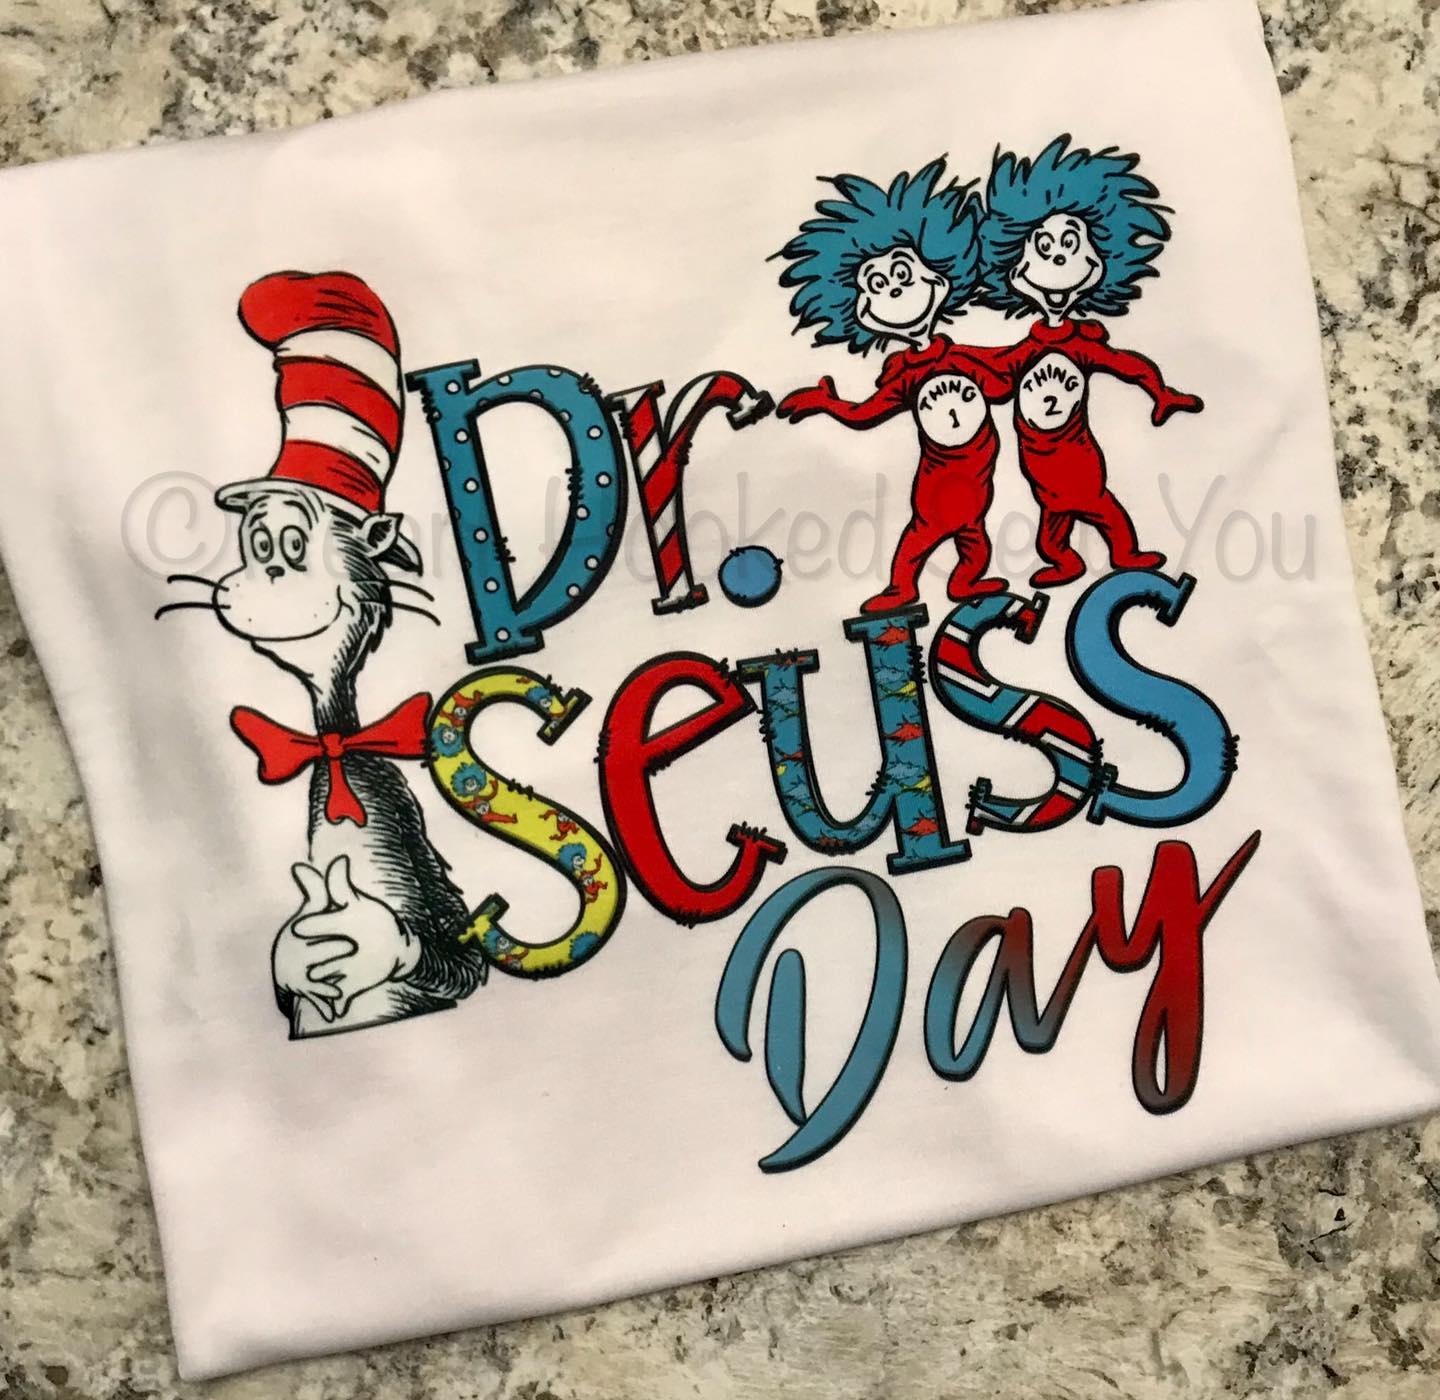 Dr Seuss Day (Youth)